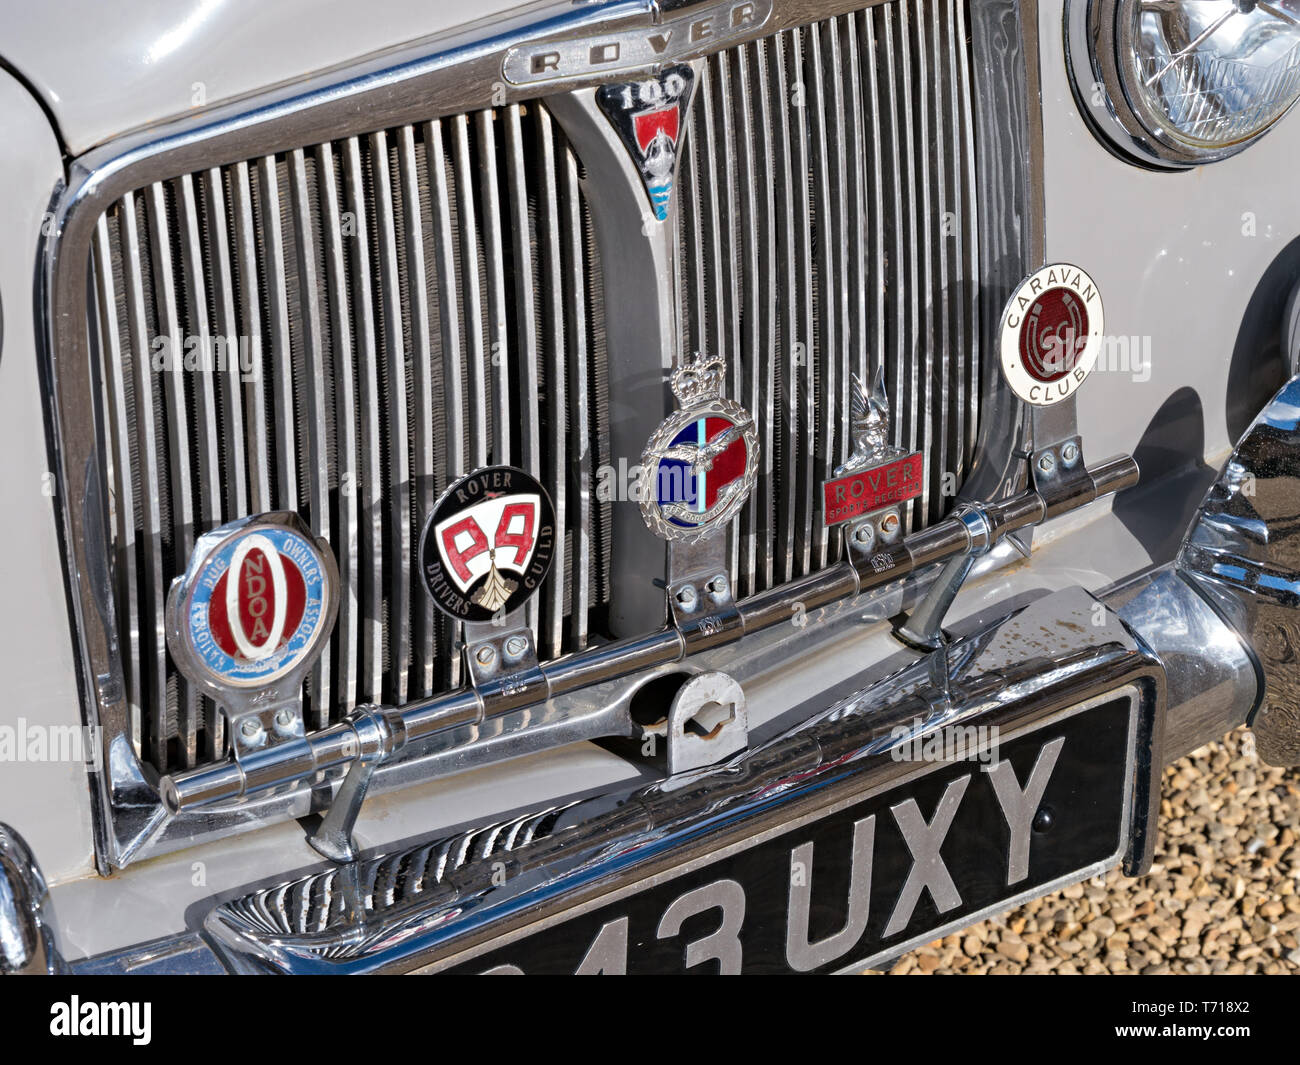 Rover P4 100 Classic Vintage Car showing detail of front radiator grille bumper and club badges, England, UK Stock Photo